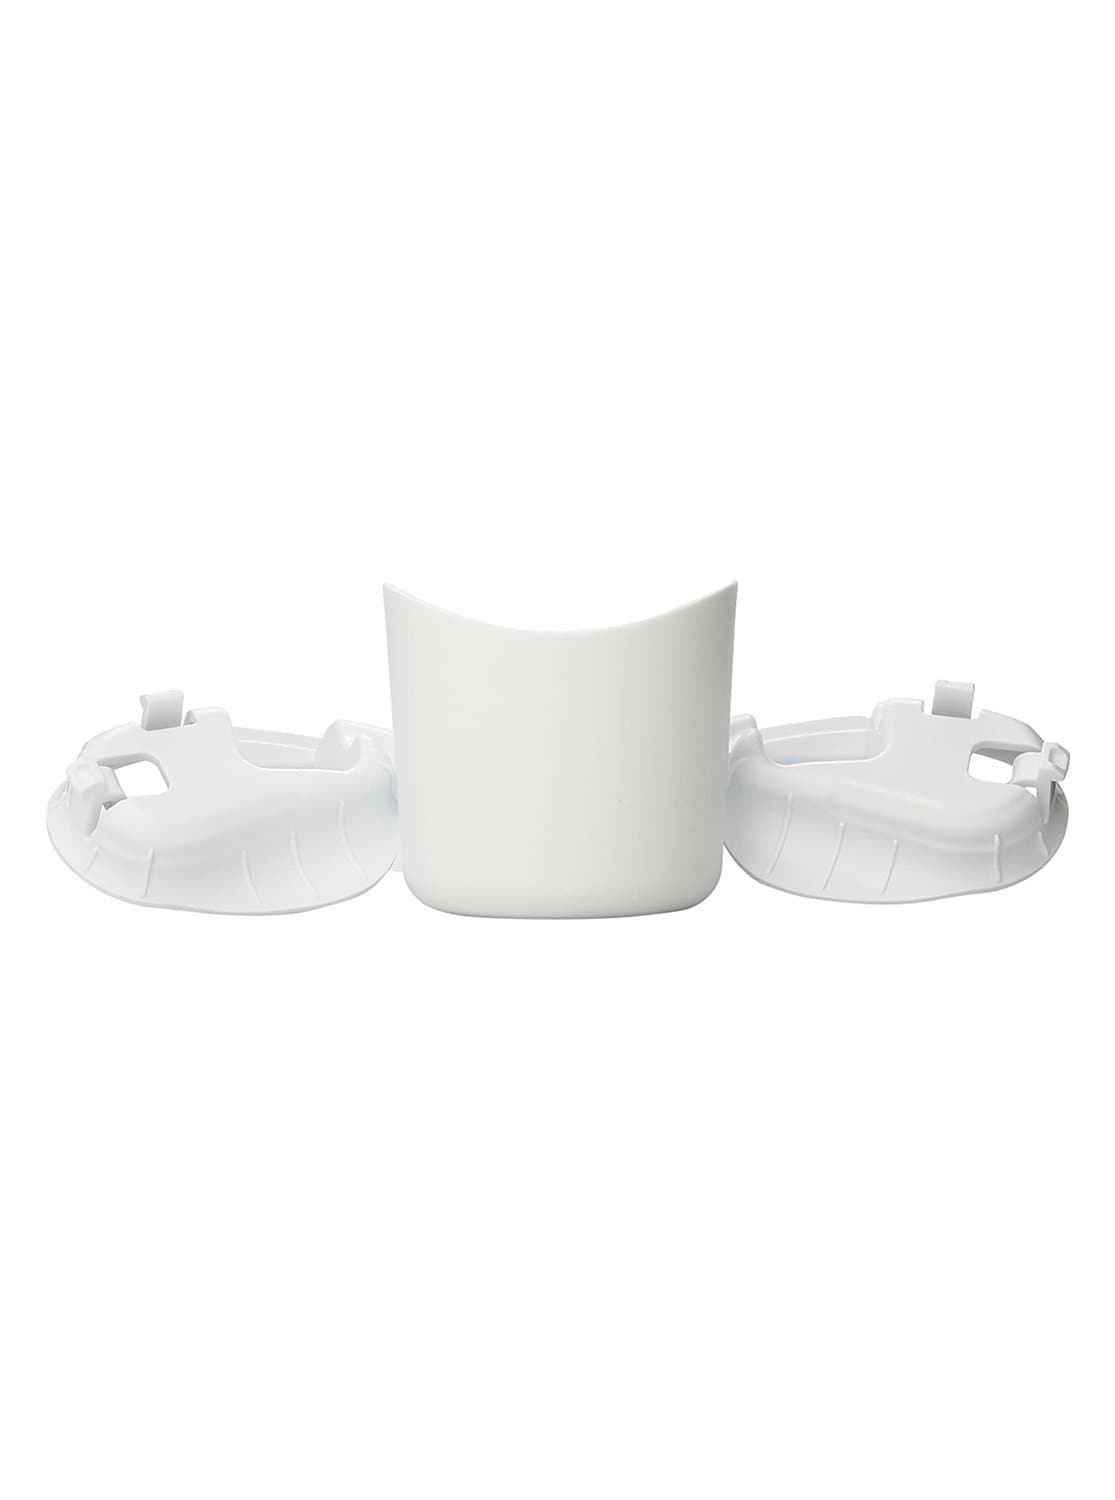 CLEK Drink-Thingy Cup Holder Fits Foonf / Fllo Car Seats - ANB Baby -$20 - $50